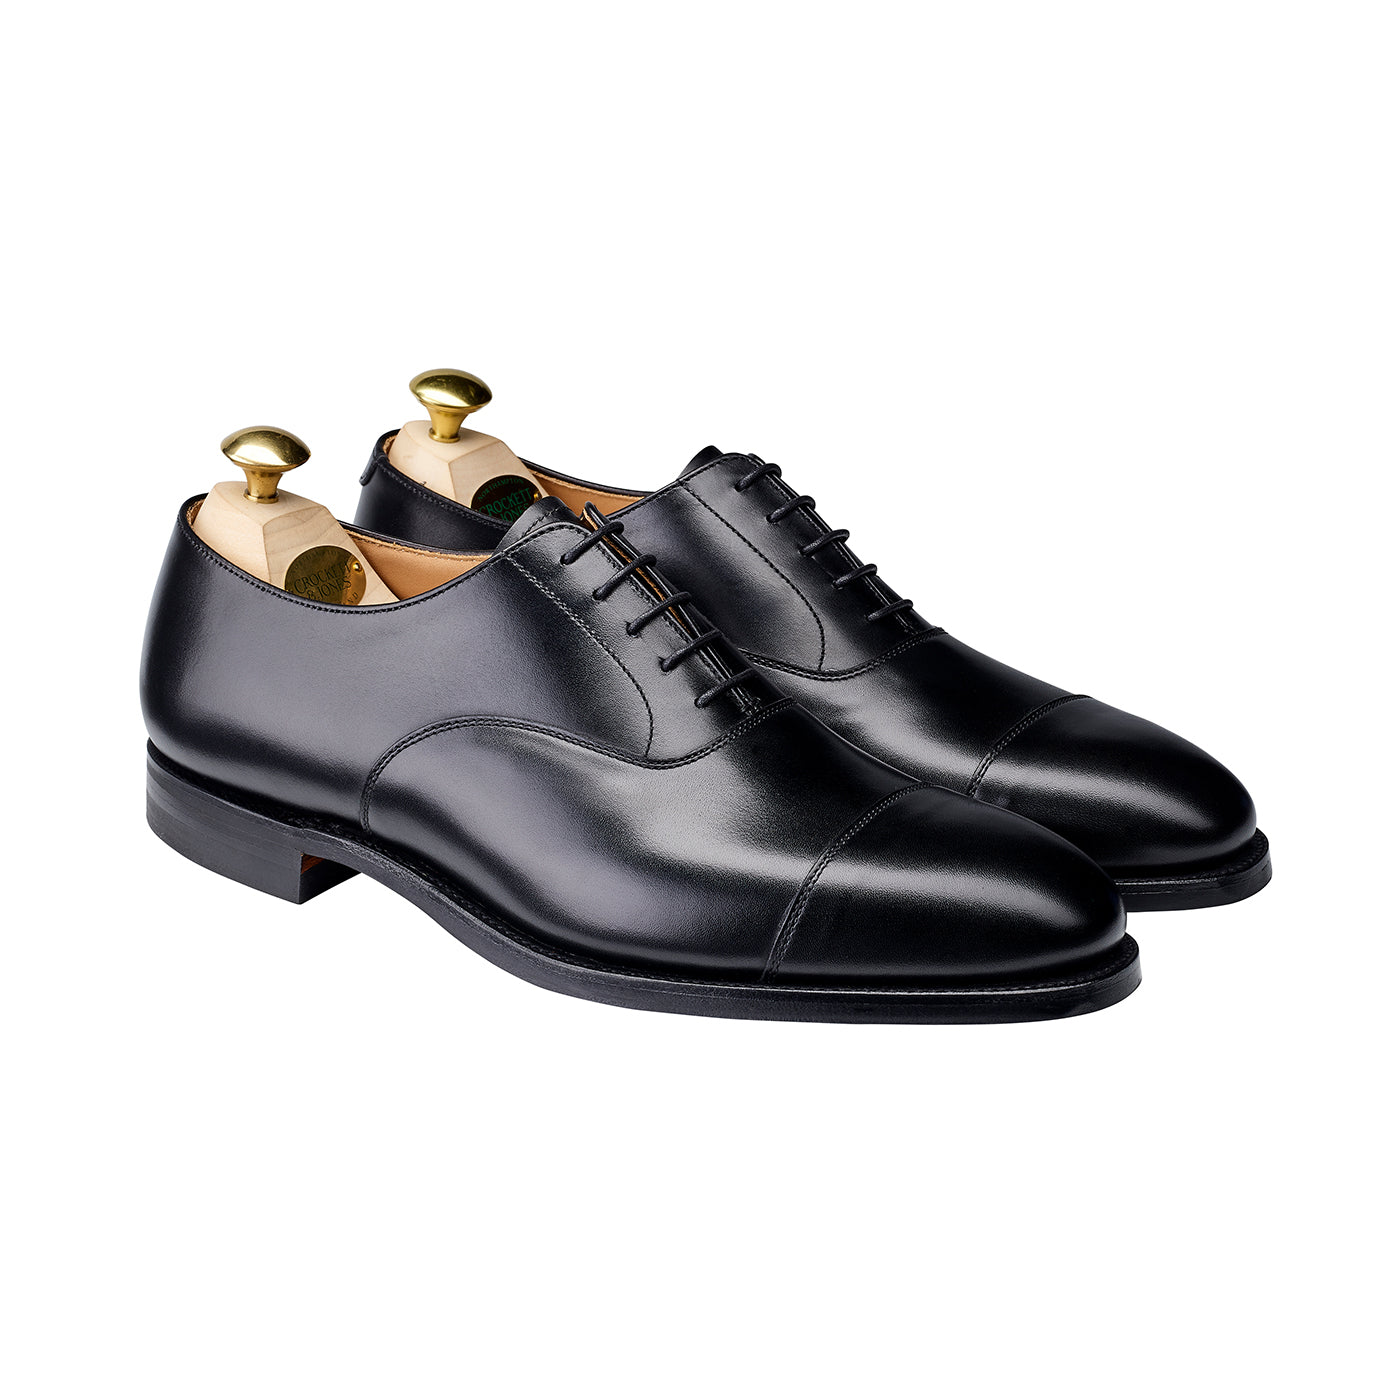 Connaught, black calf oxford made in leather, branded Crockett & Jones